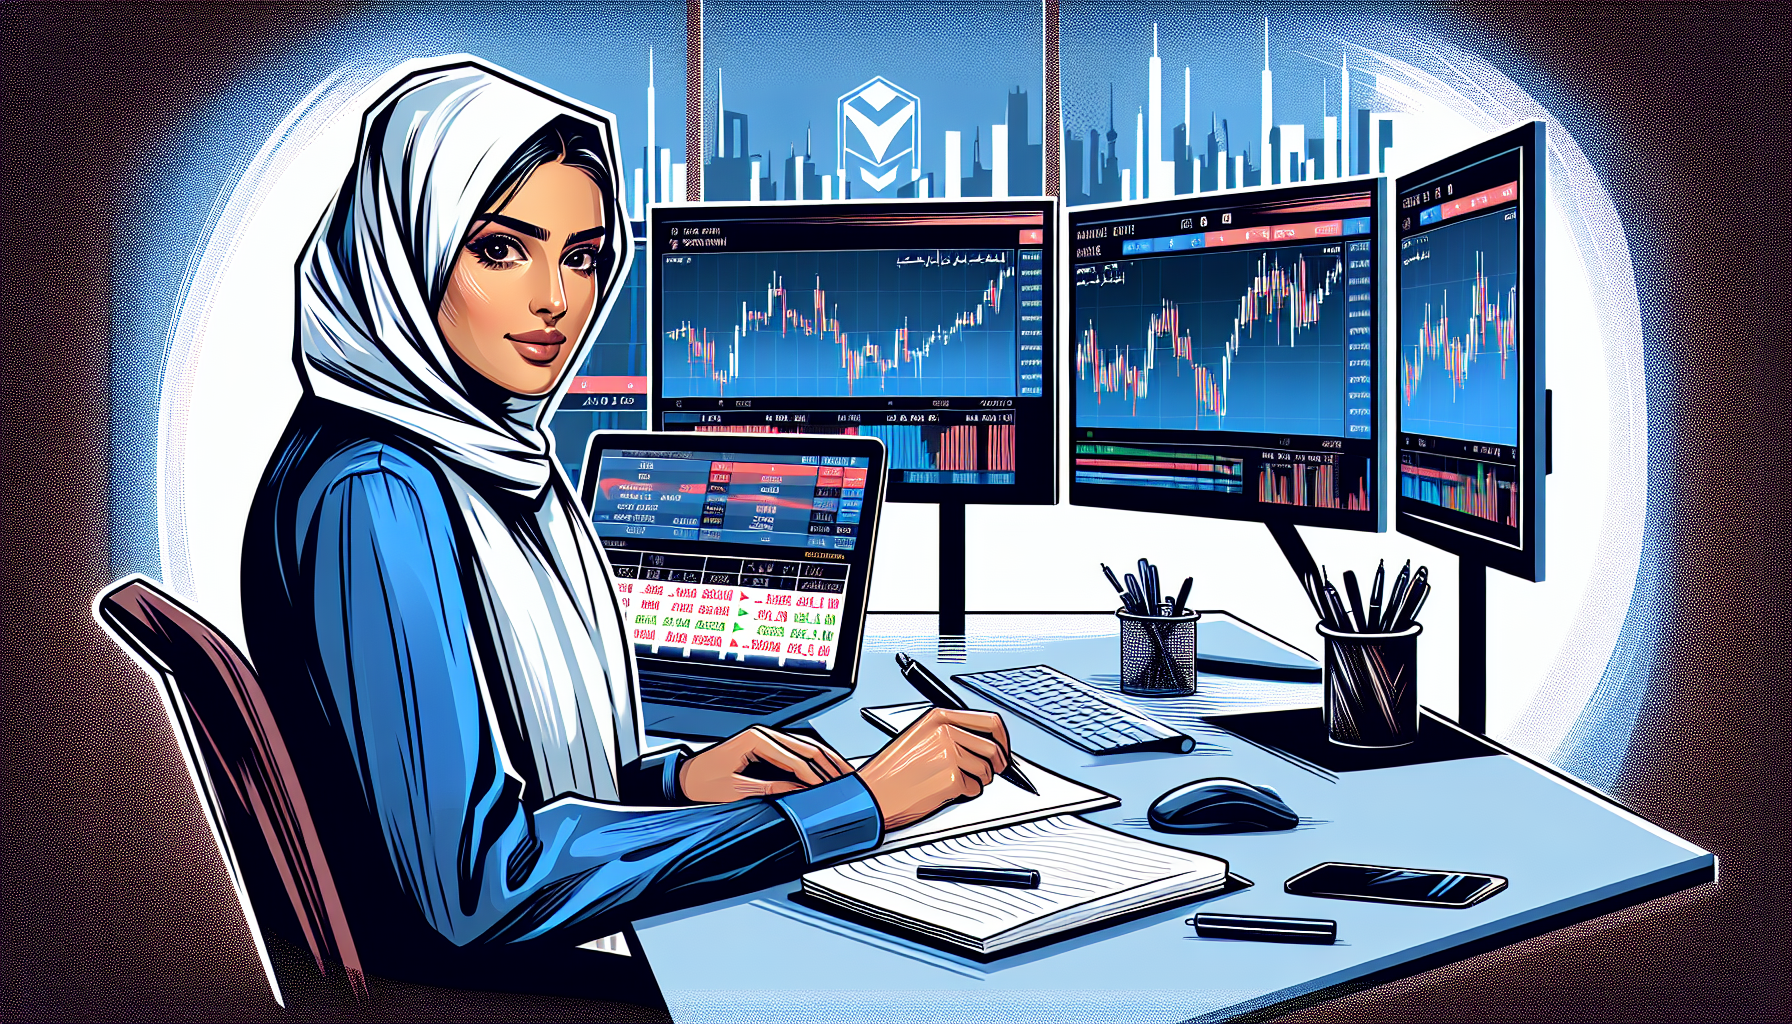 Create an image showing a sophisticated investor at a sleek home office, analyzing stock charts on multiple computer screens. The setting exudes a modern, high-tech vibe with elements like financial news tickers, a notepad with investment strategies, and Questrade's logo subtly visible on one of the screens. The investor looks confident and focused, symbolizing the potential for maximizing investments using a Questrade Margin Account.